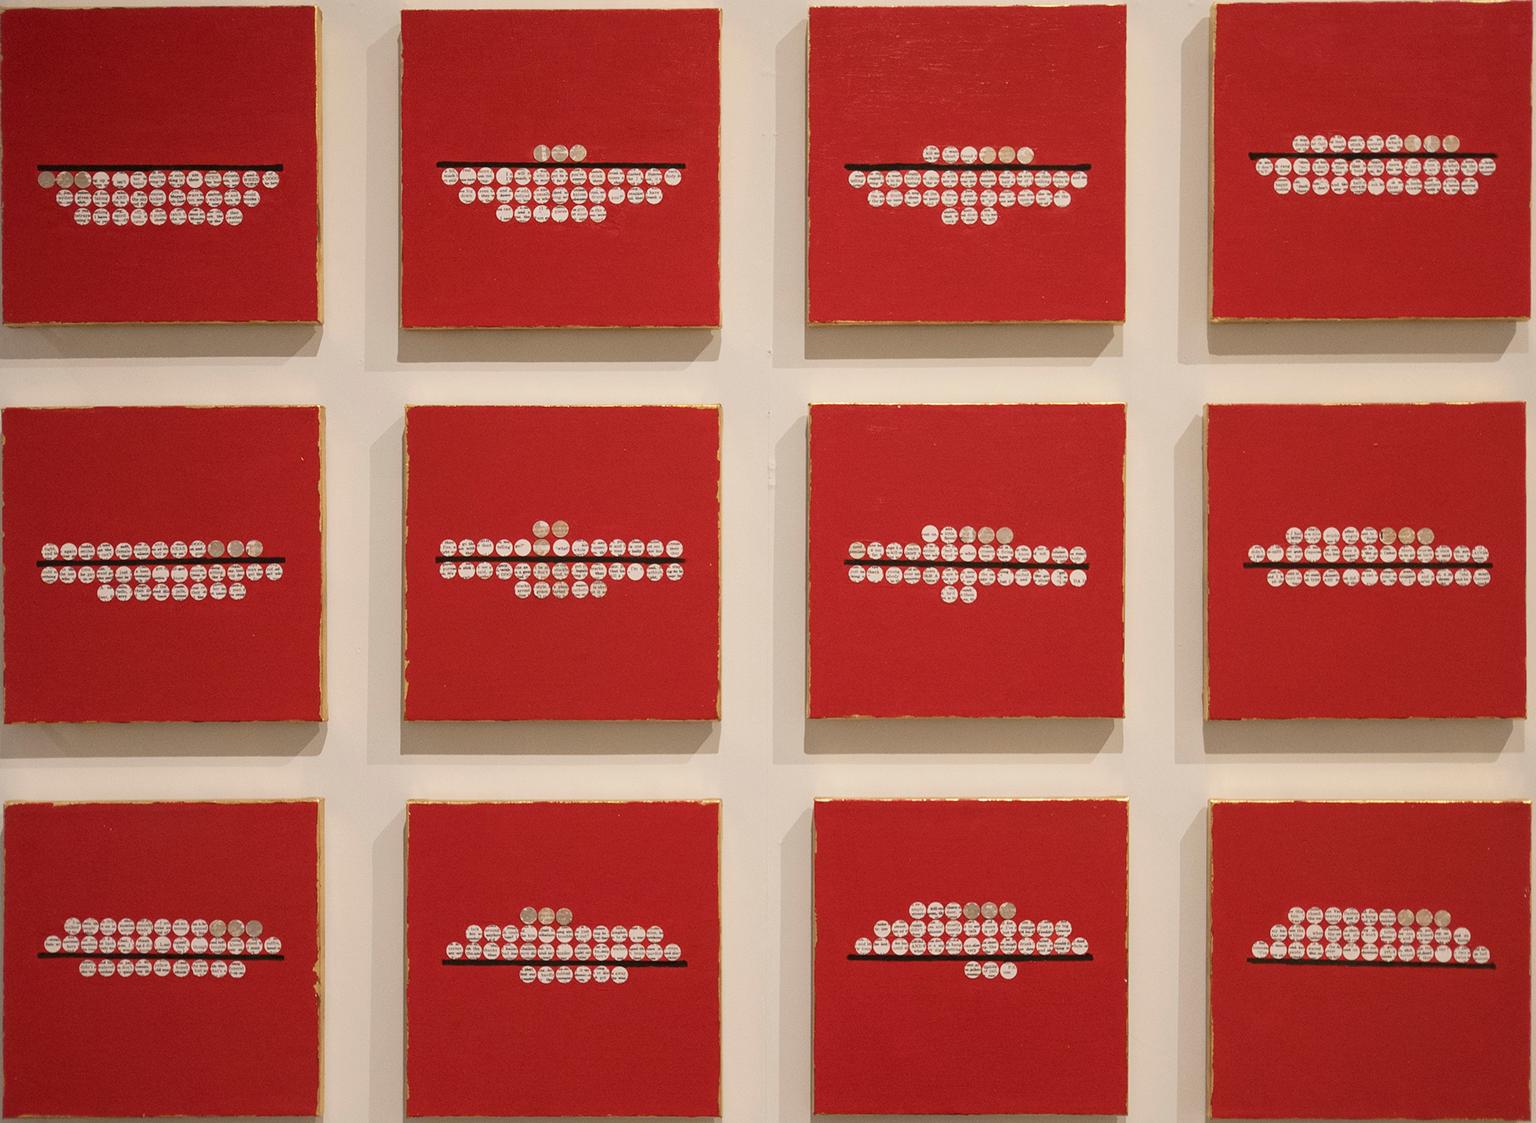 under/over by Ann Chisholm.
Paper and acrylic paint on canvas. 
42x58x1 in
under/over is about inequality. 

This work consists of 12 pieces that are each 12 x 12 x 1 inches. With a red background, and gold foil edges, there are 33 circles on each